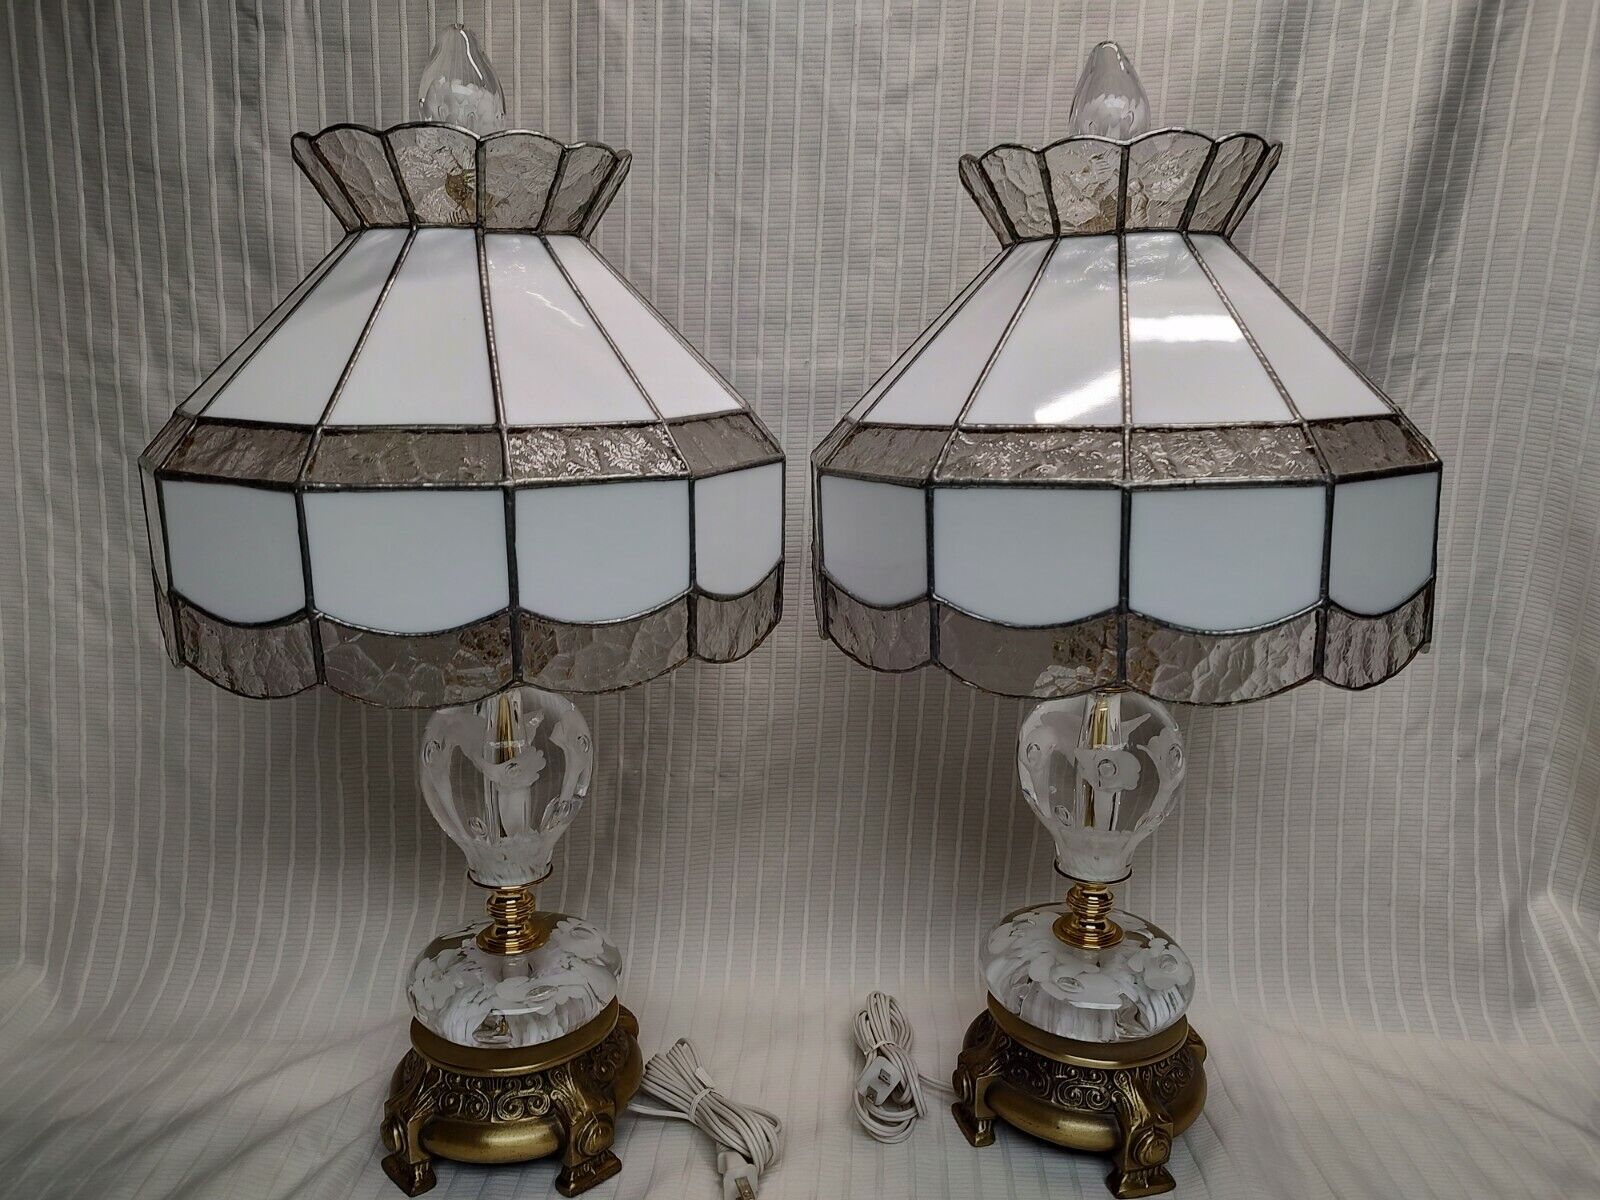 Gorgeous Pair of Paperweight Lamps Signed Joe Rice w/Original Leaded Shades